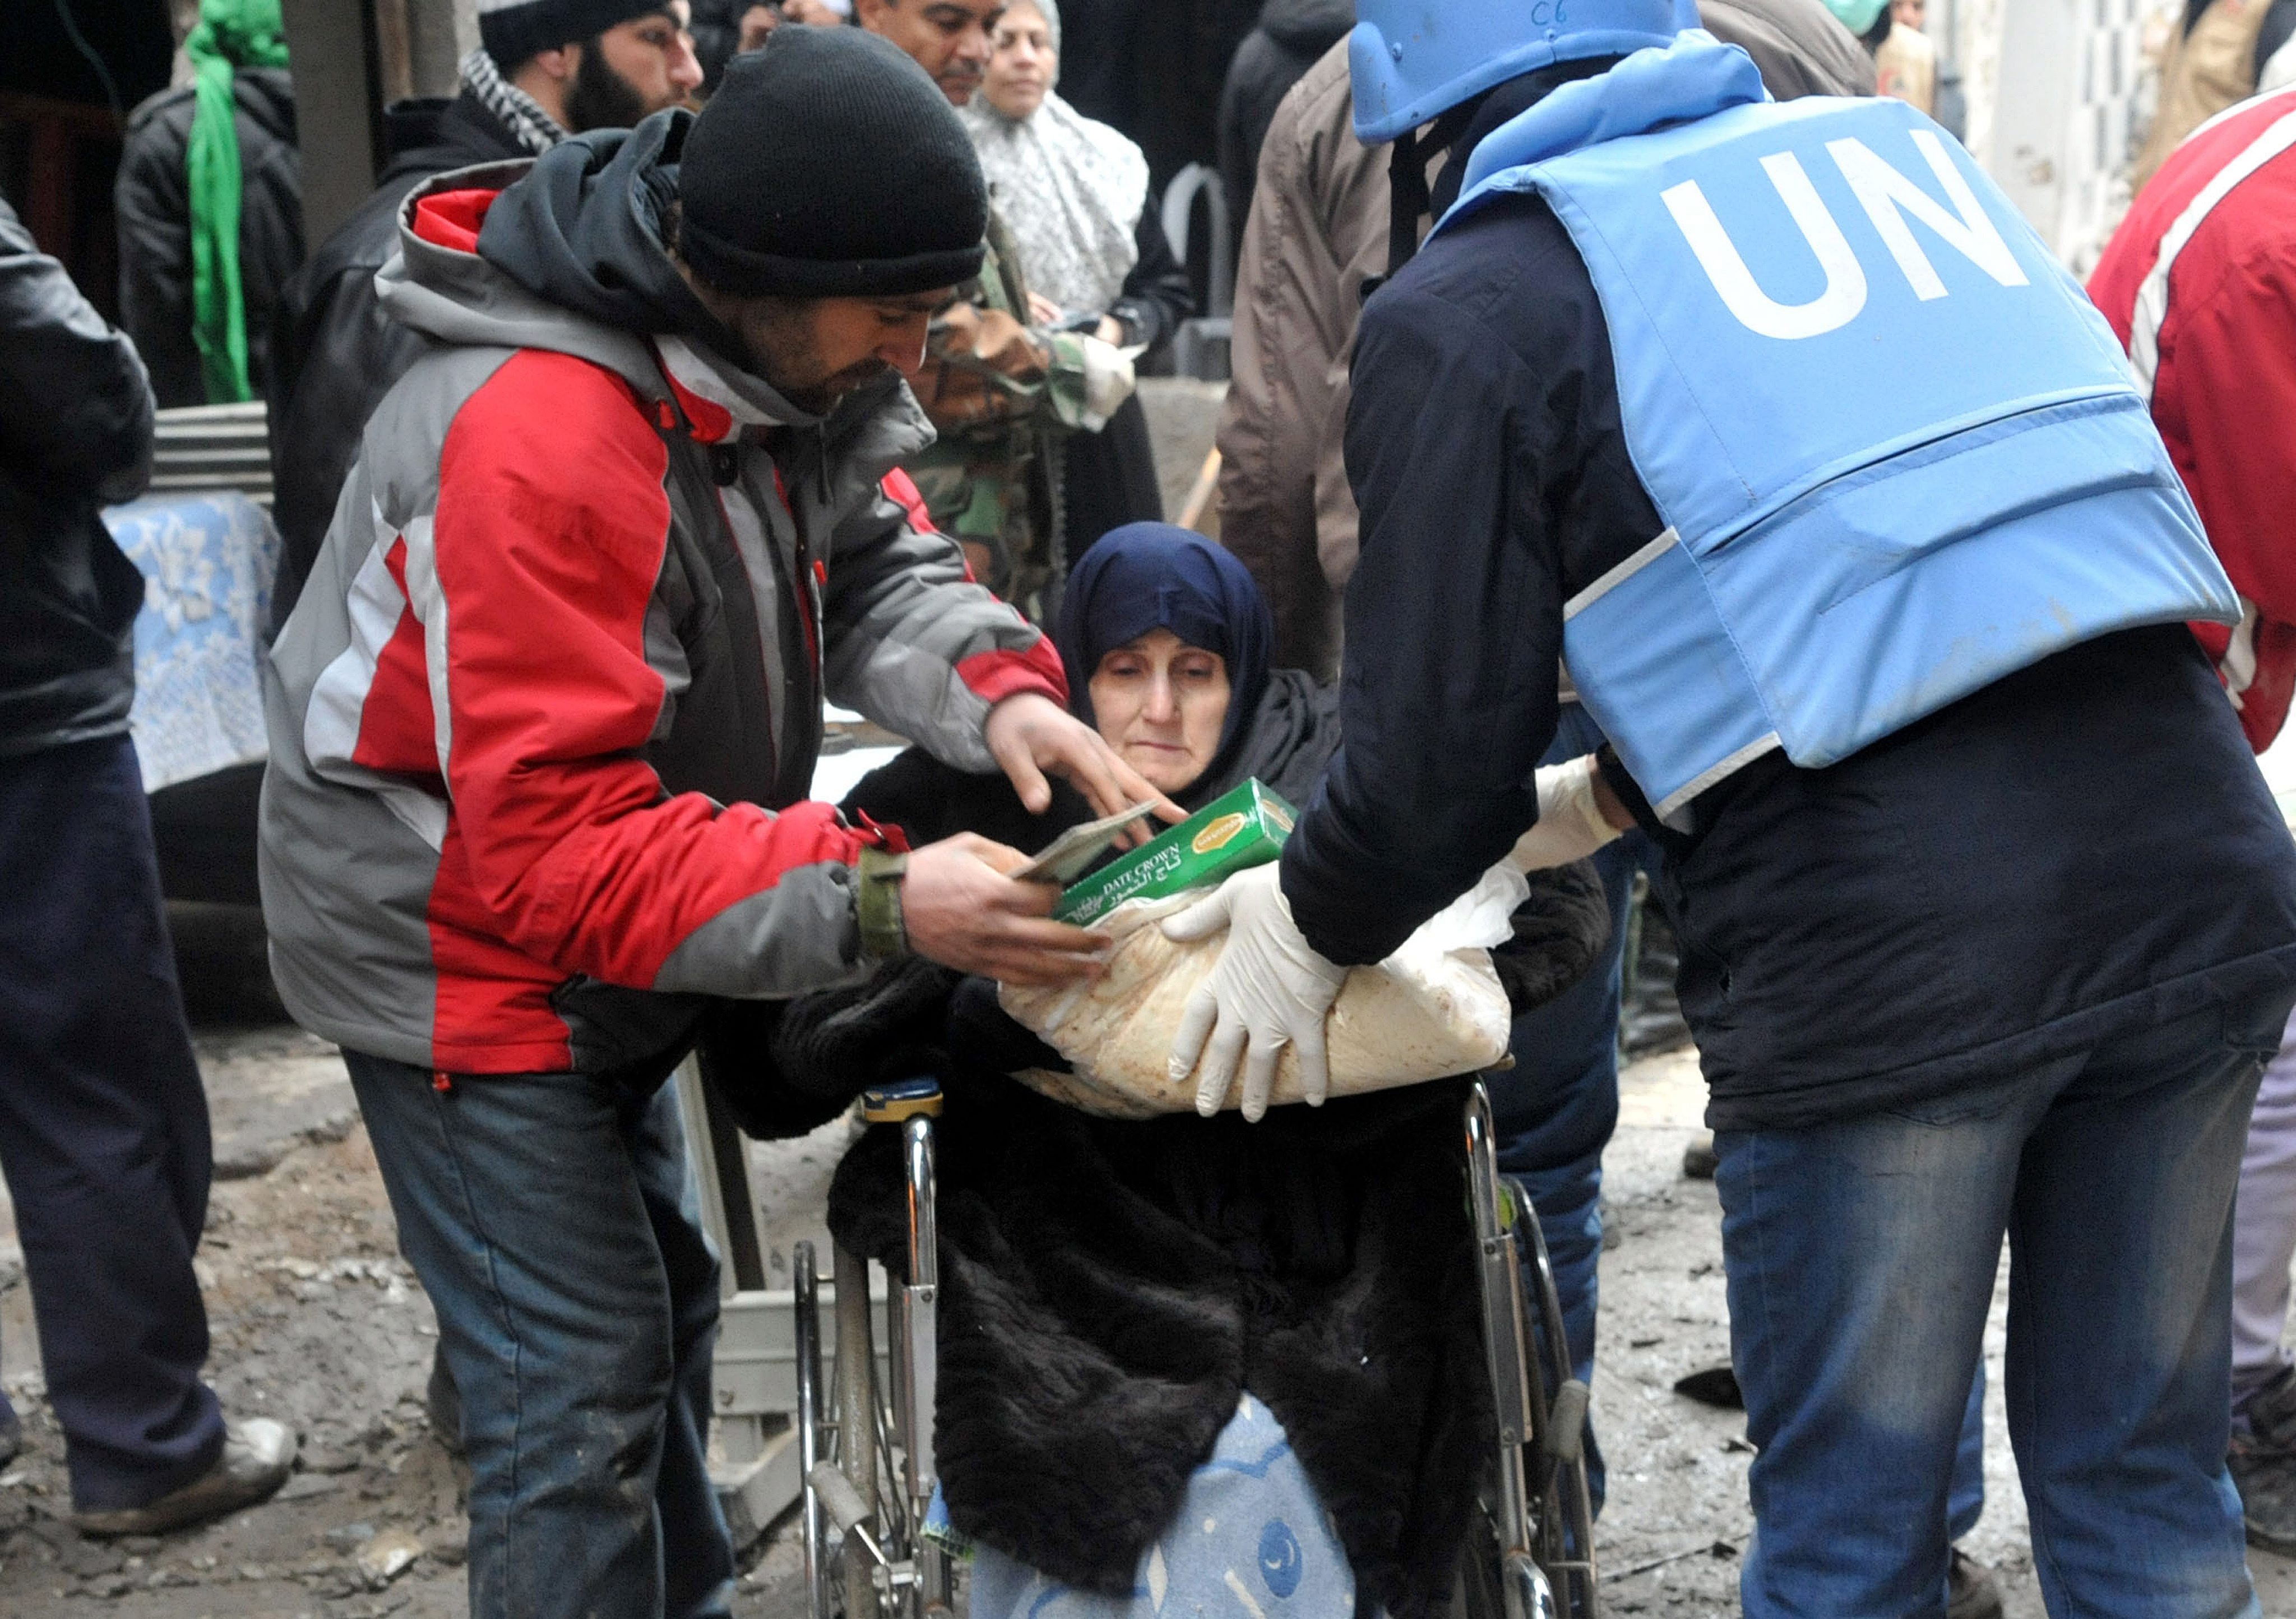 Three Million People Across Syria Need Assistance In Winter, Warns UN Official